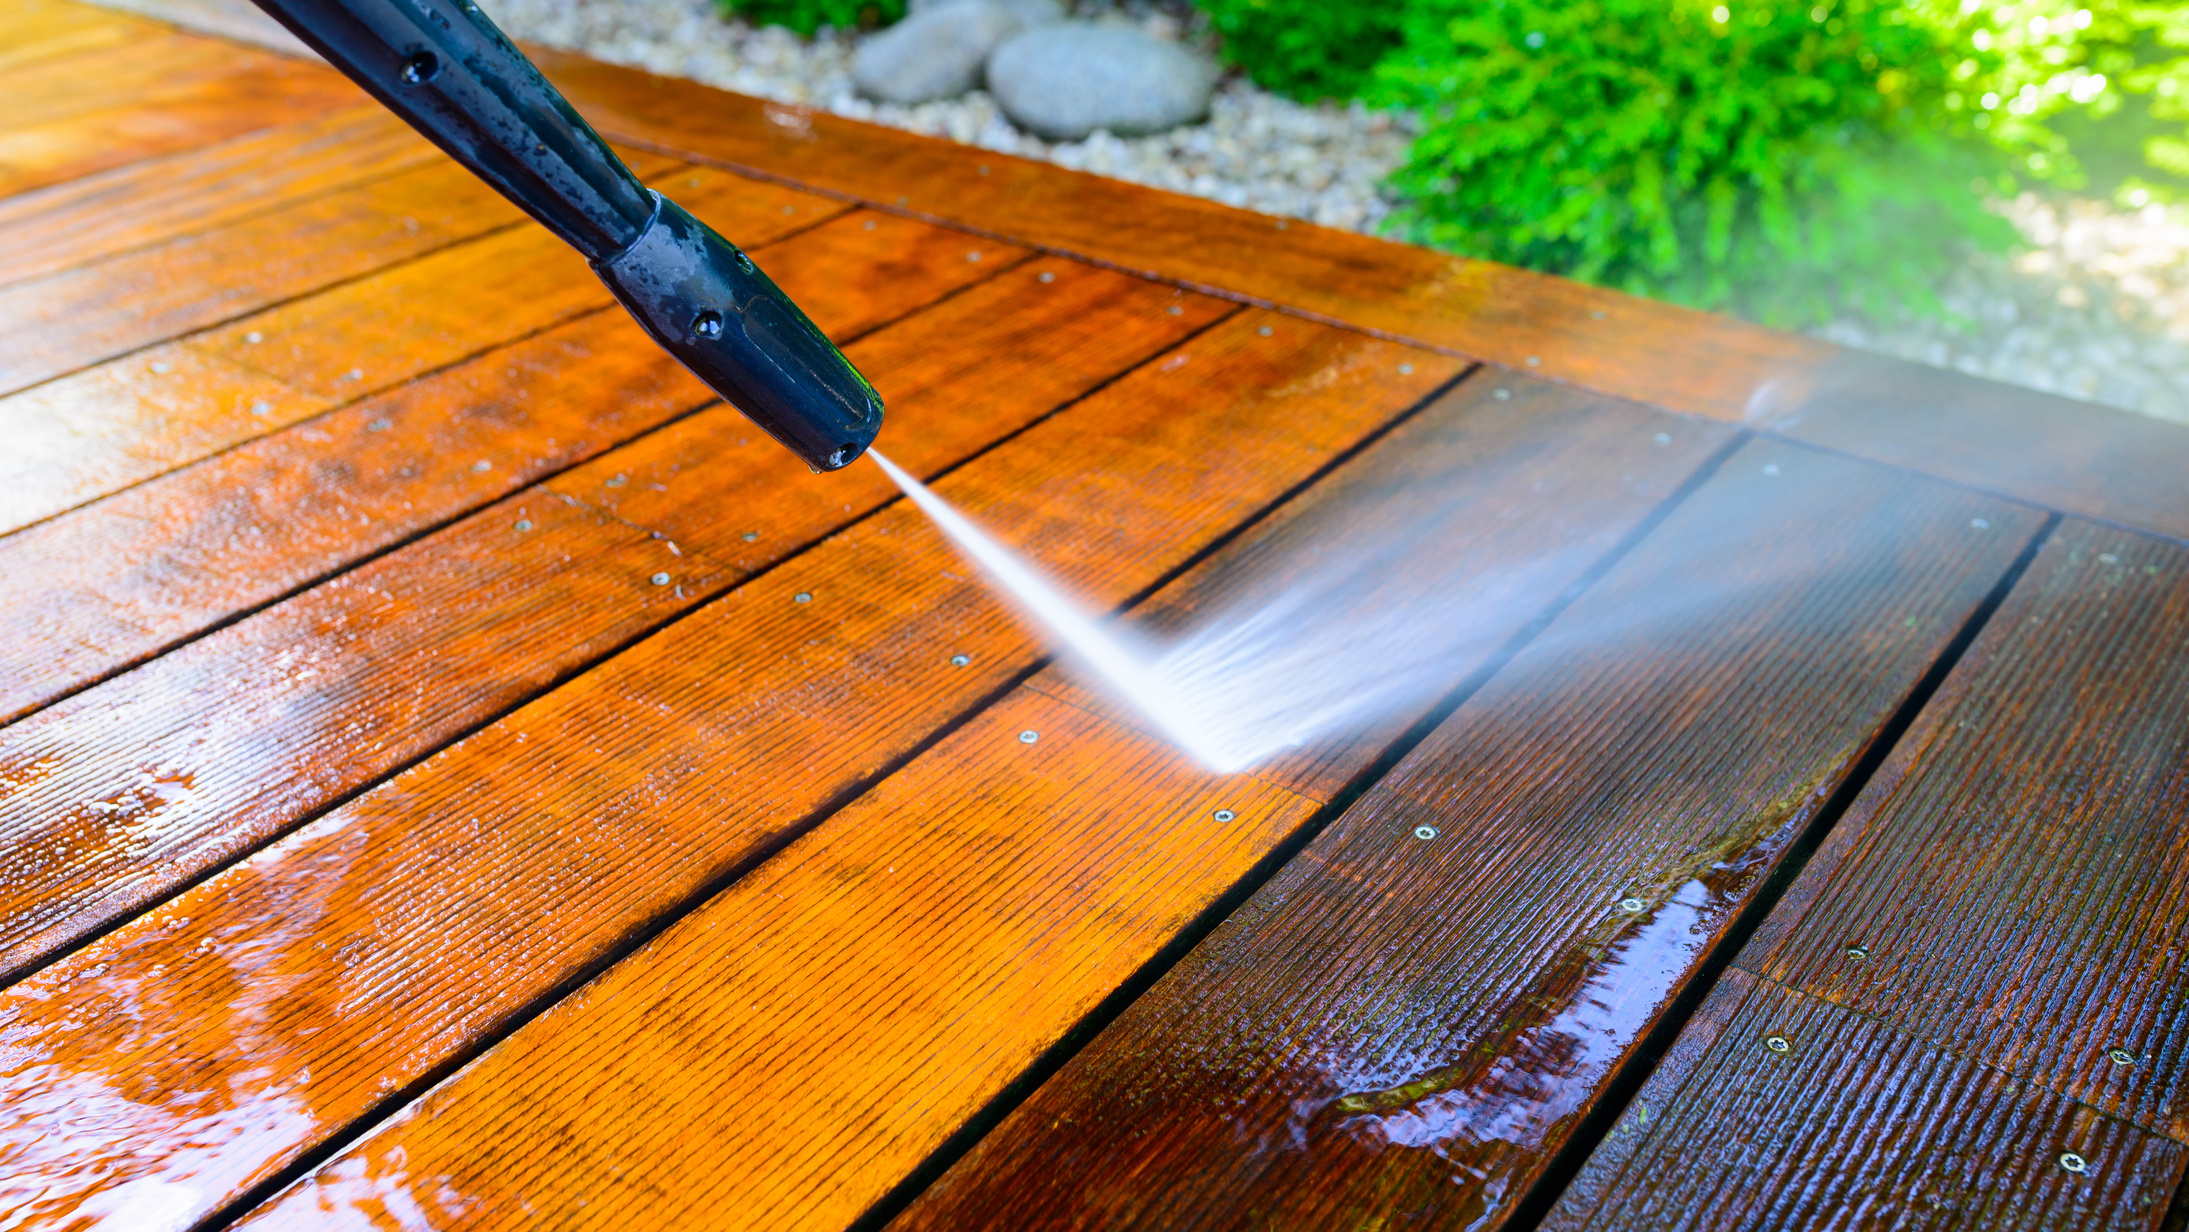 Close Up of Pressure Washer Cleaning Wooden Plates